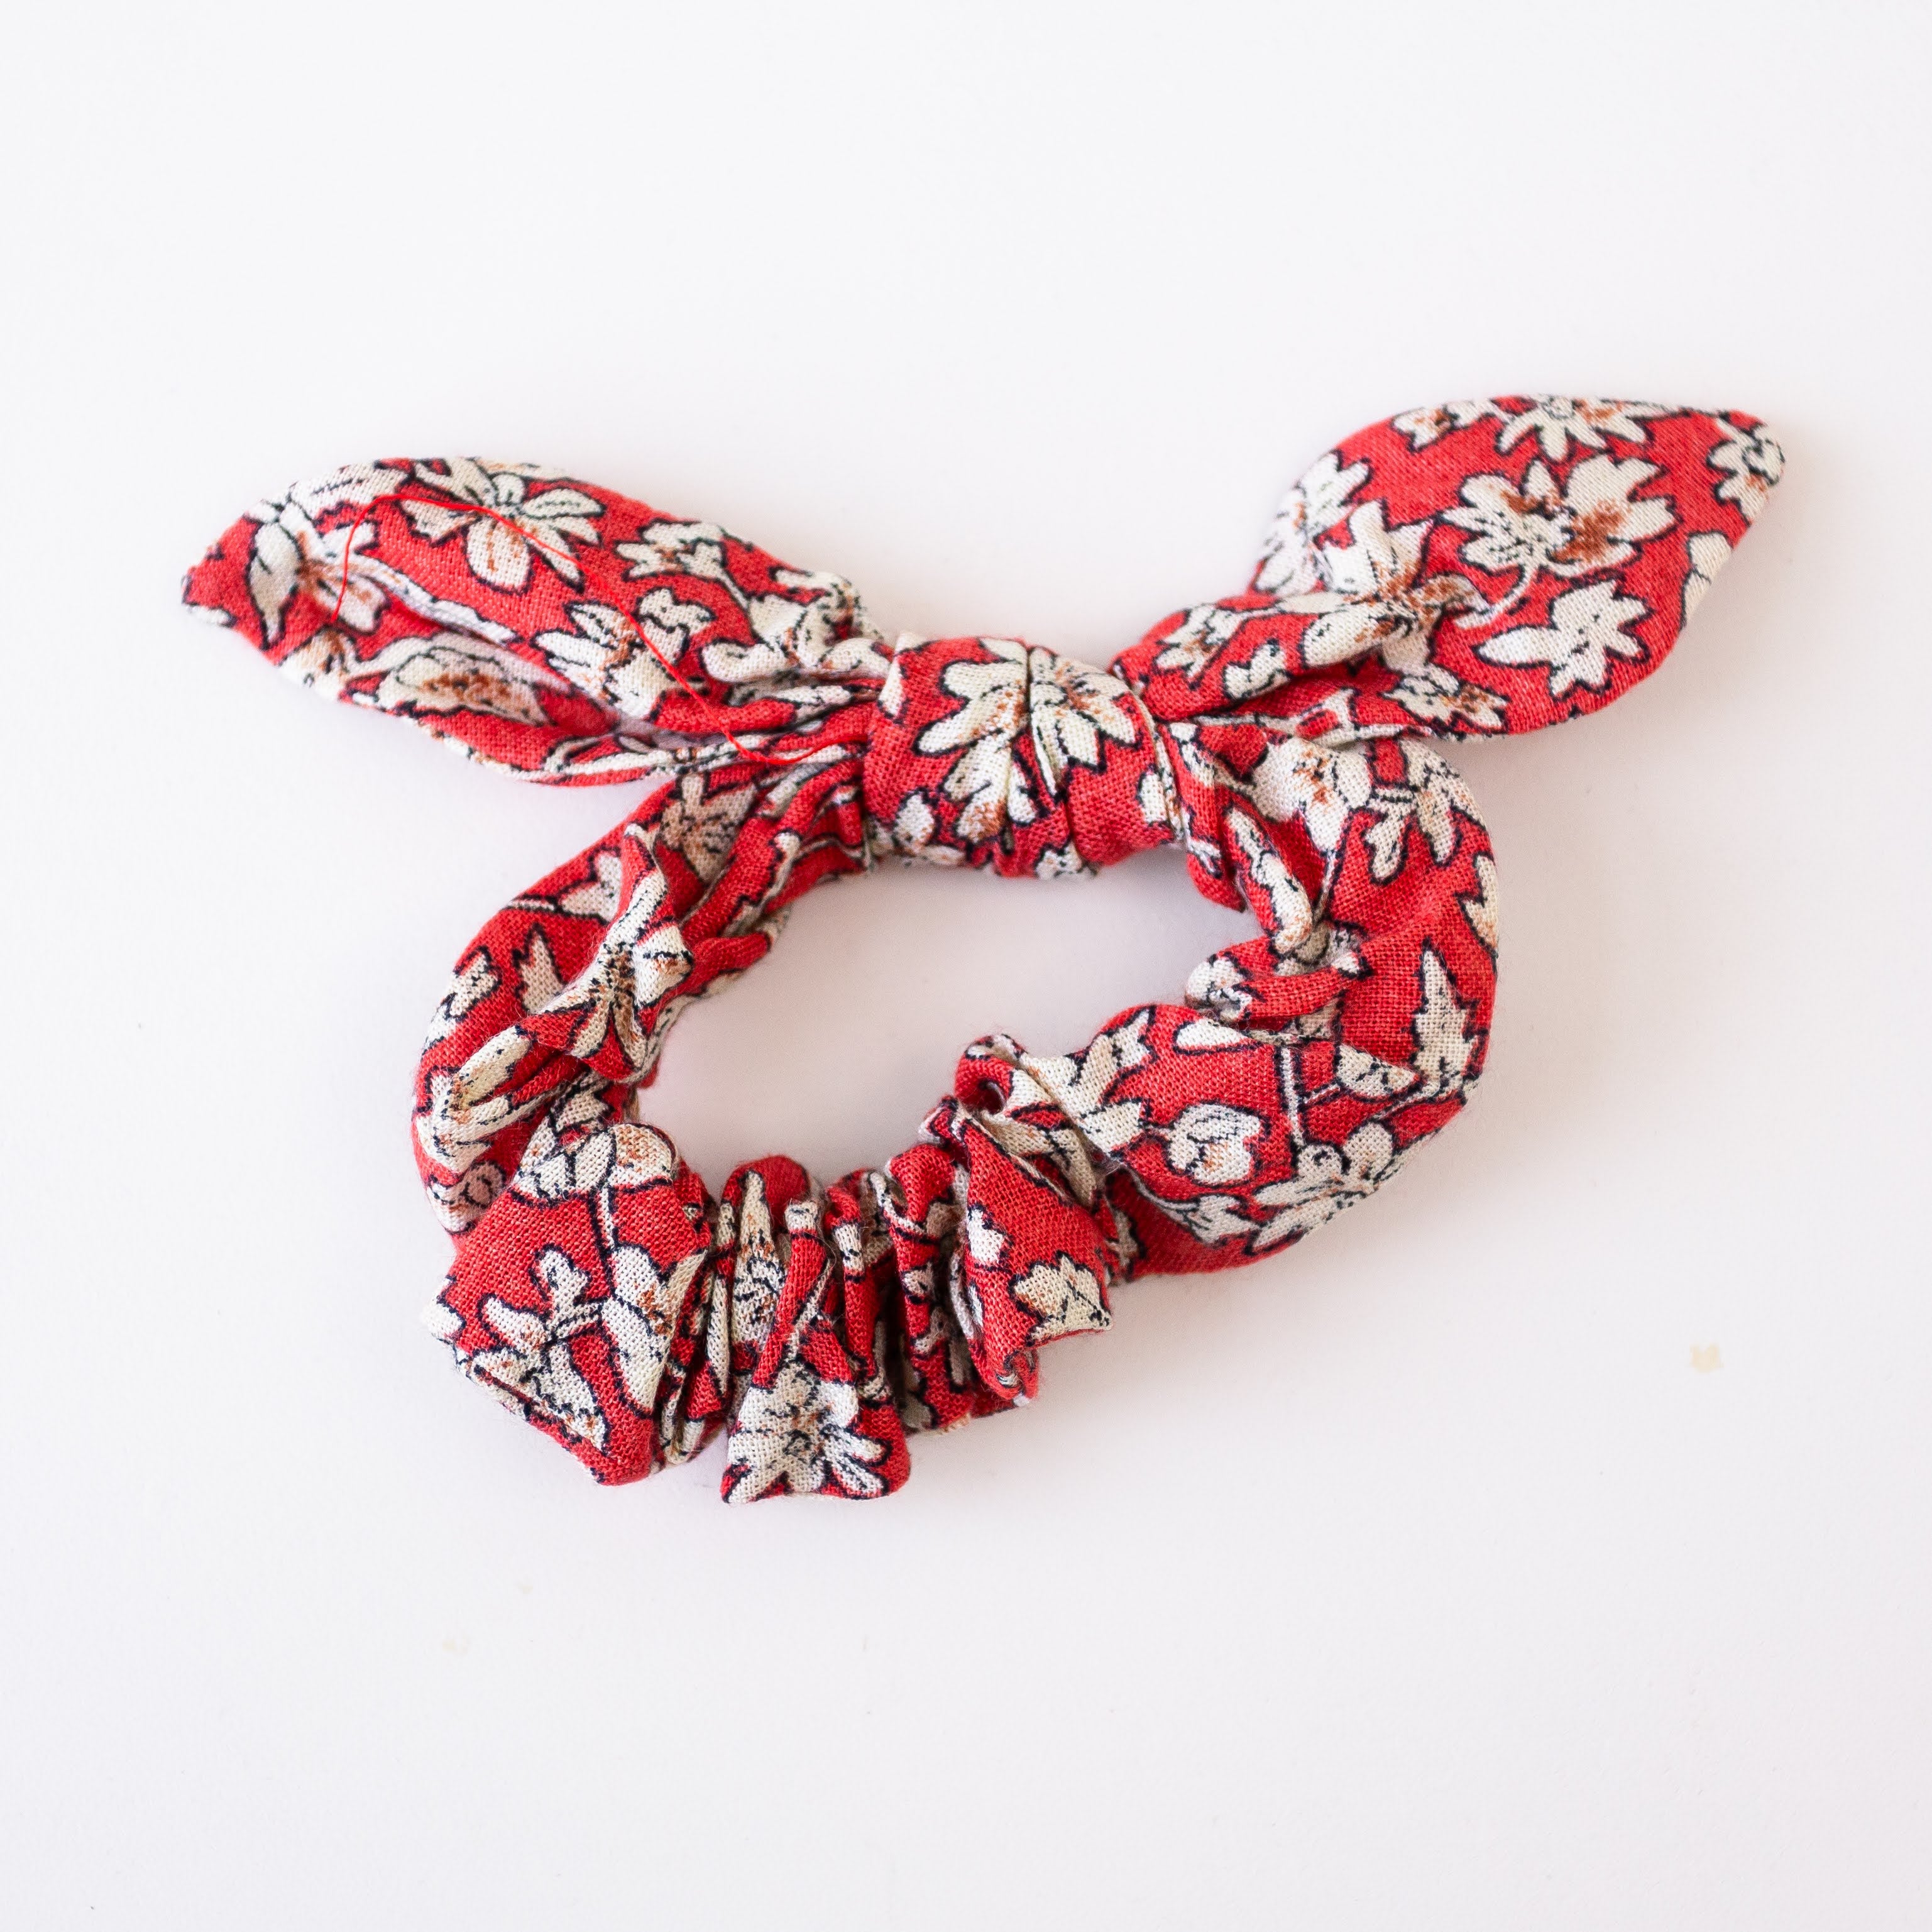 Knotted Scrunchie - handmade by the women of Amani using Kenyan materials for a Fair Trade boutique